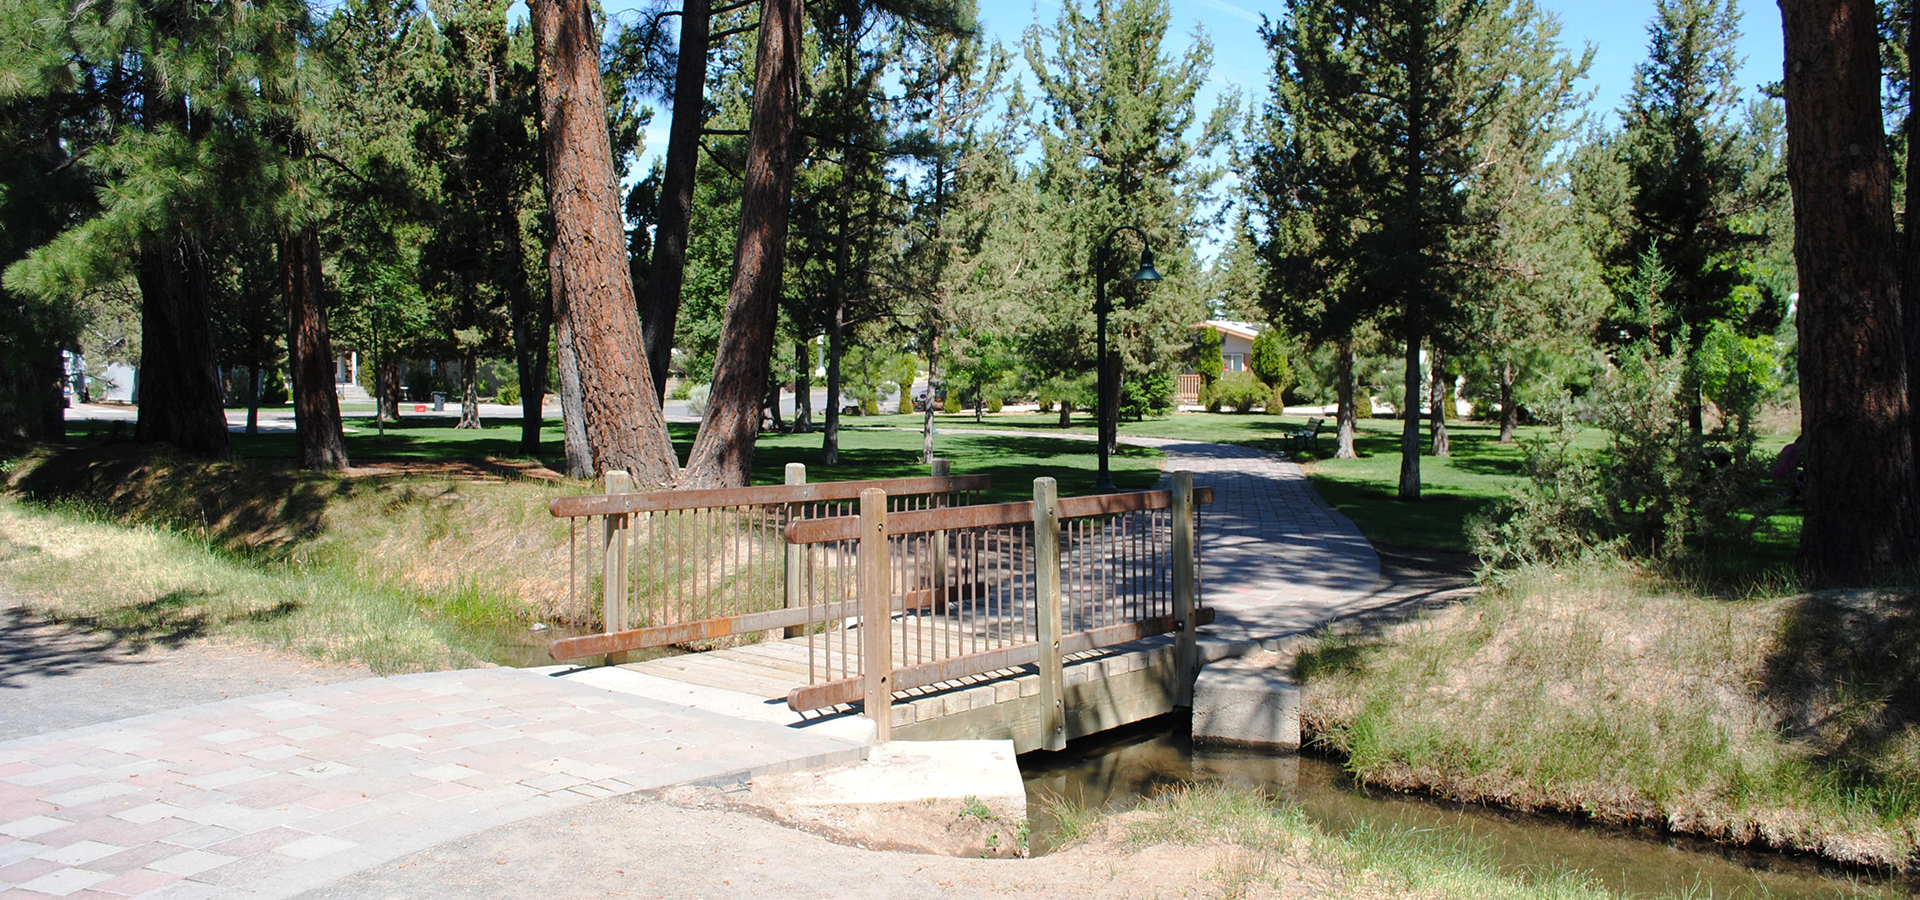 bridge across creek to paved path surrounded by ponderosas and green grass